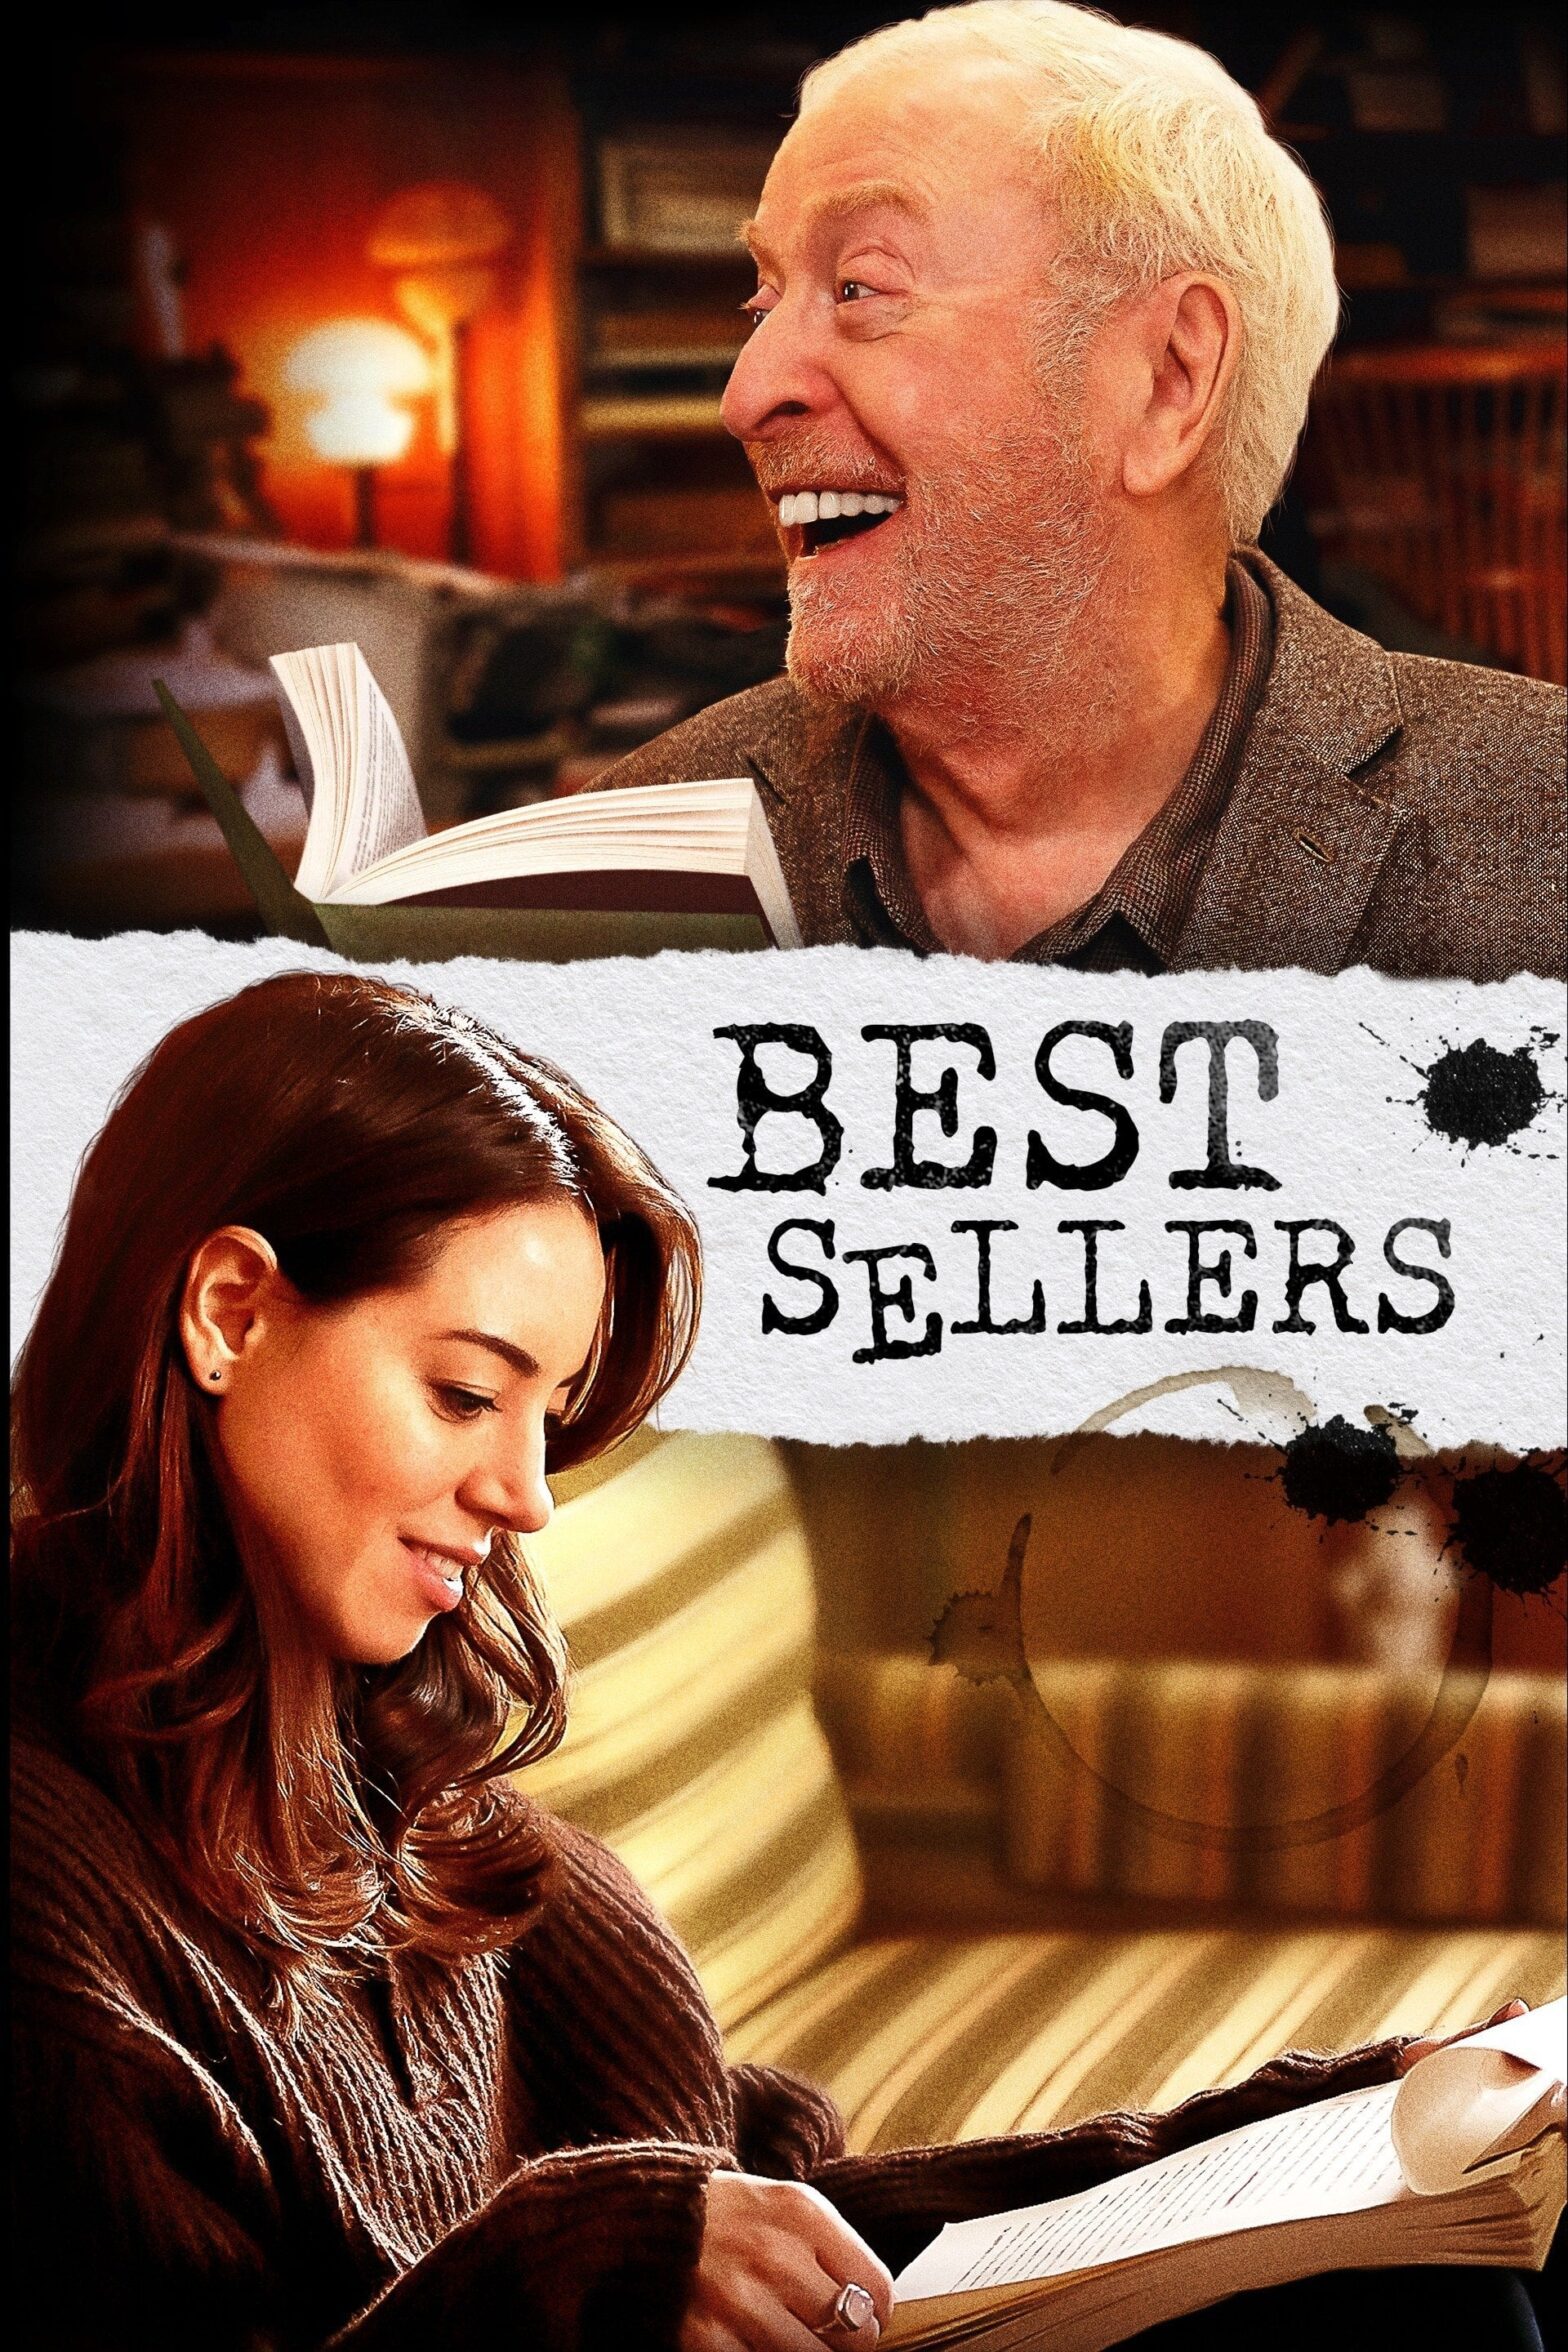 Poster for the movie "Best Sellers"